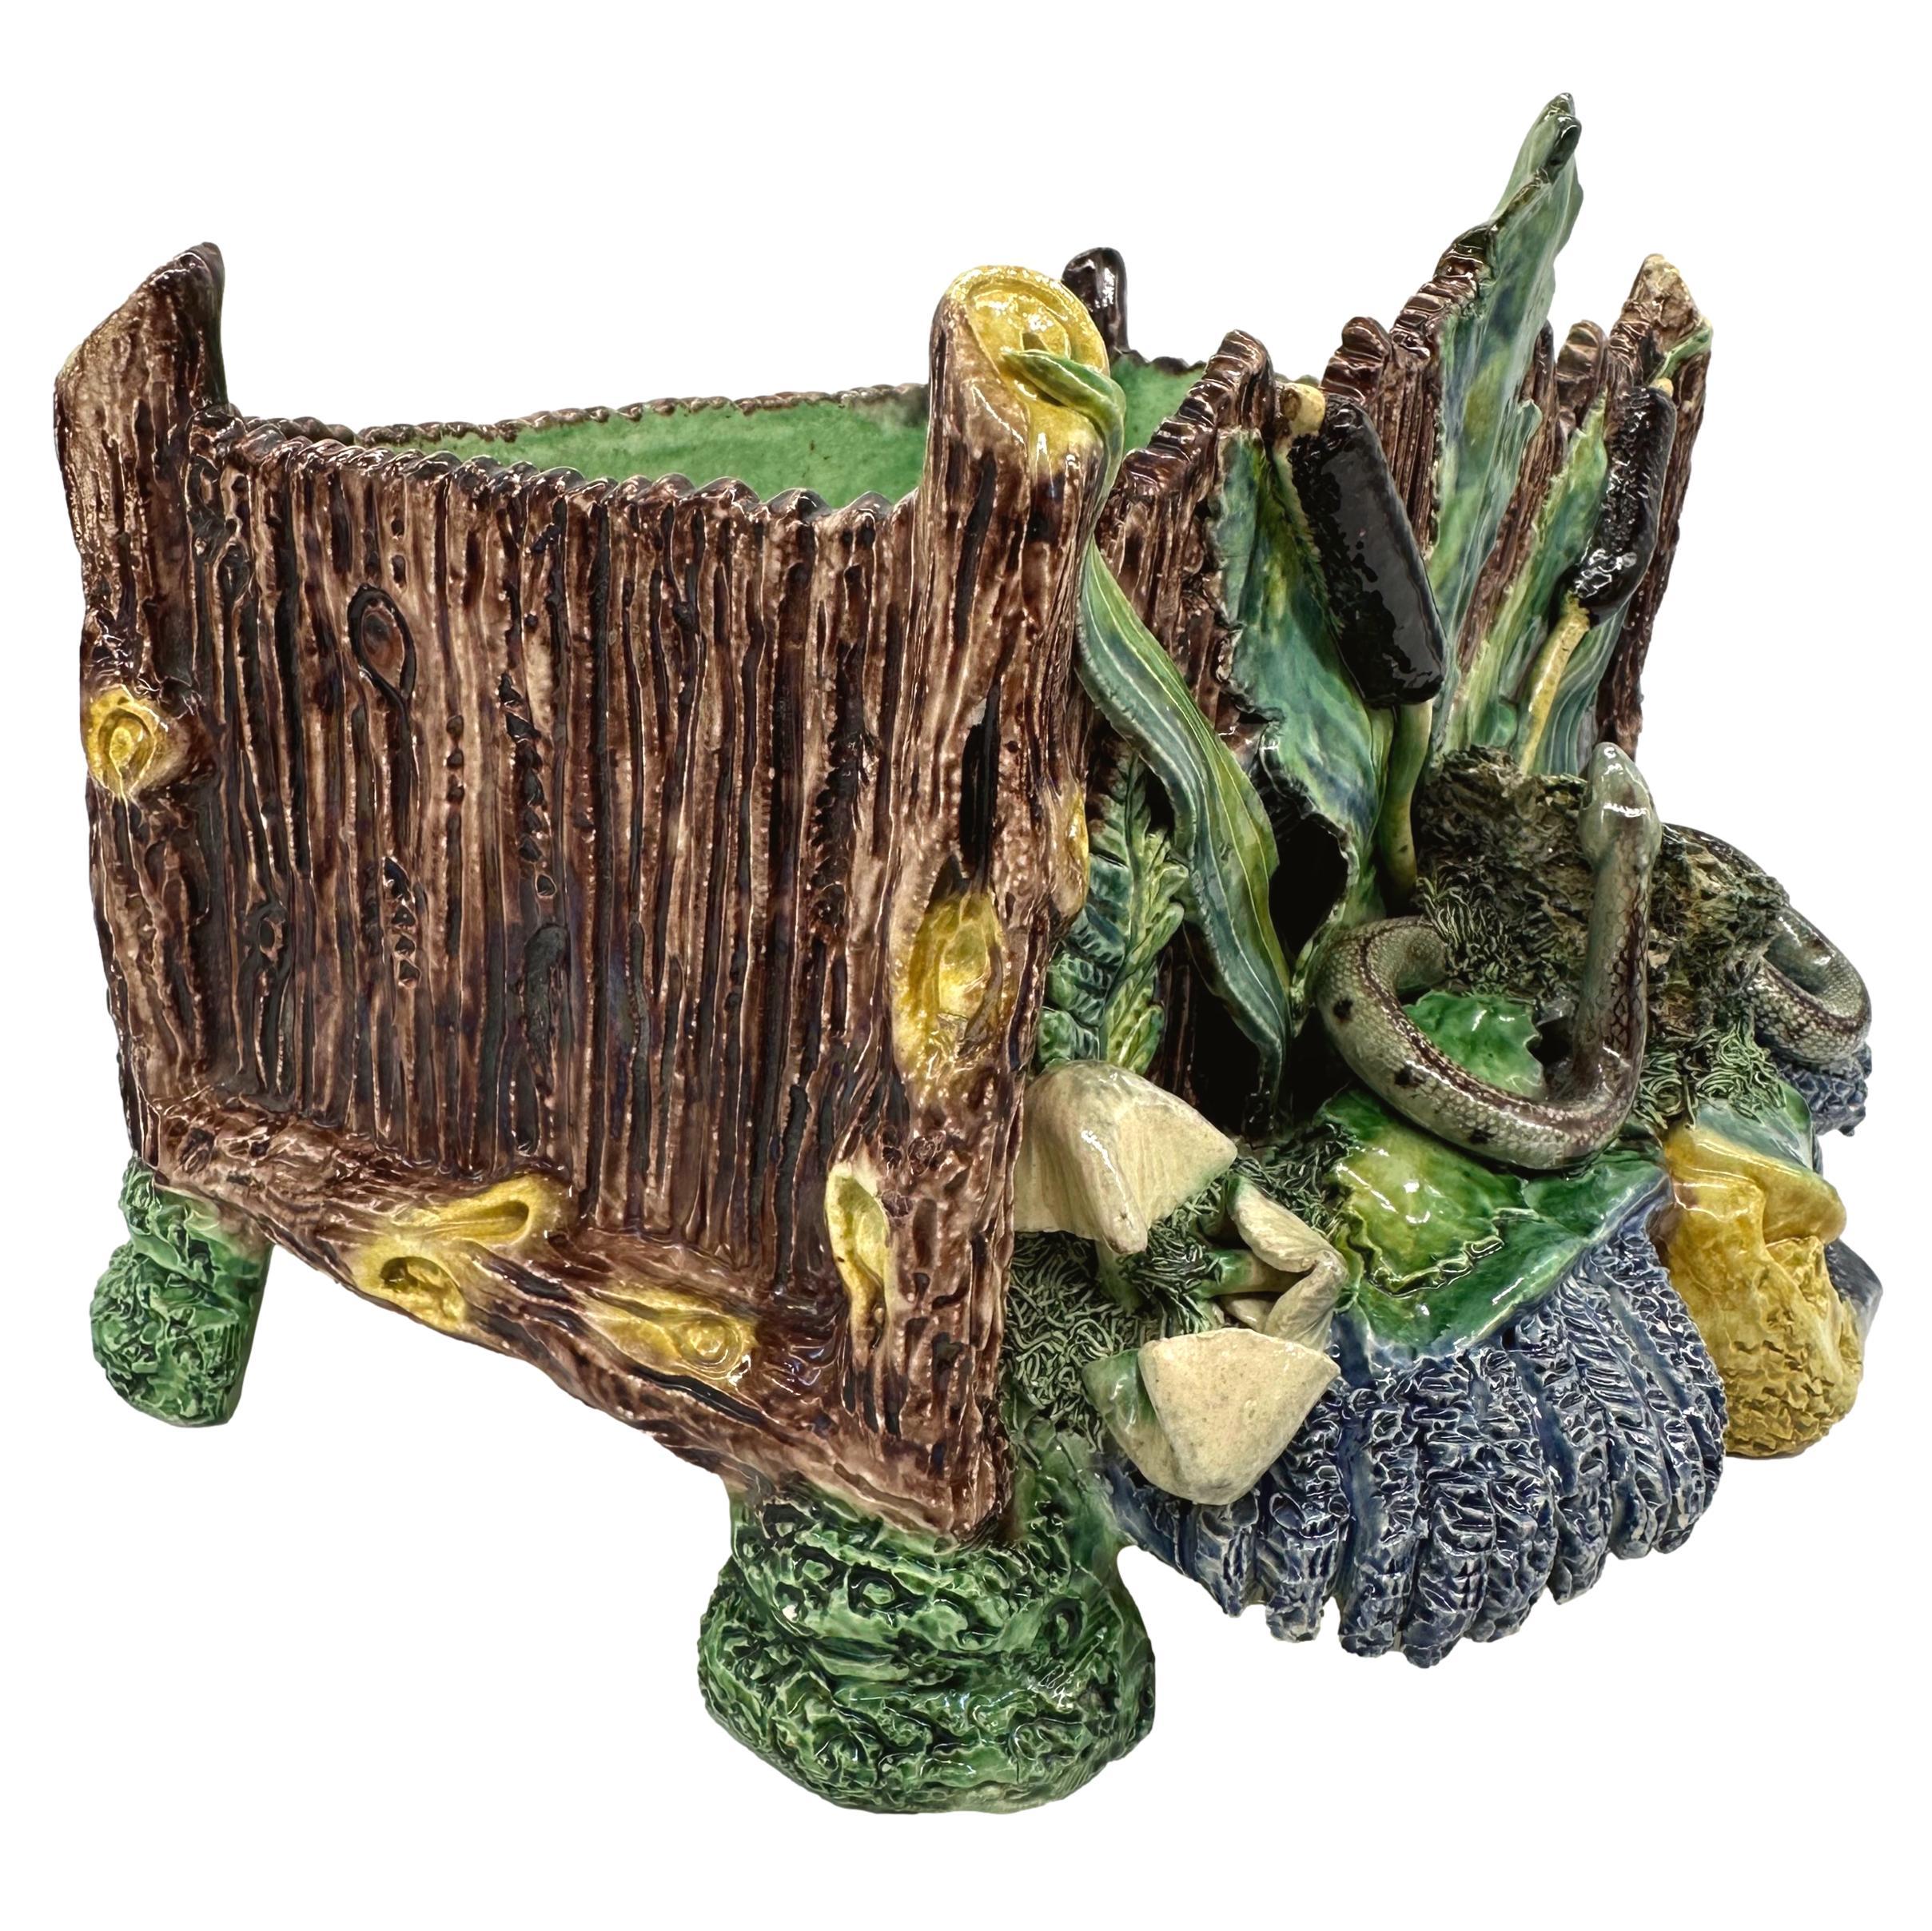 Molded A Palissy Ware Majolica Jardinière, Bird's Nest and Snake, School of Paris, 1880 For Sale